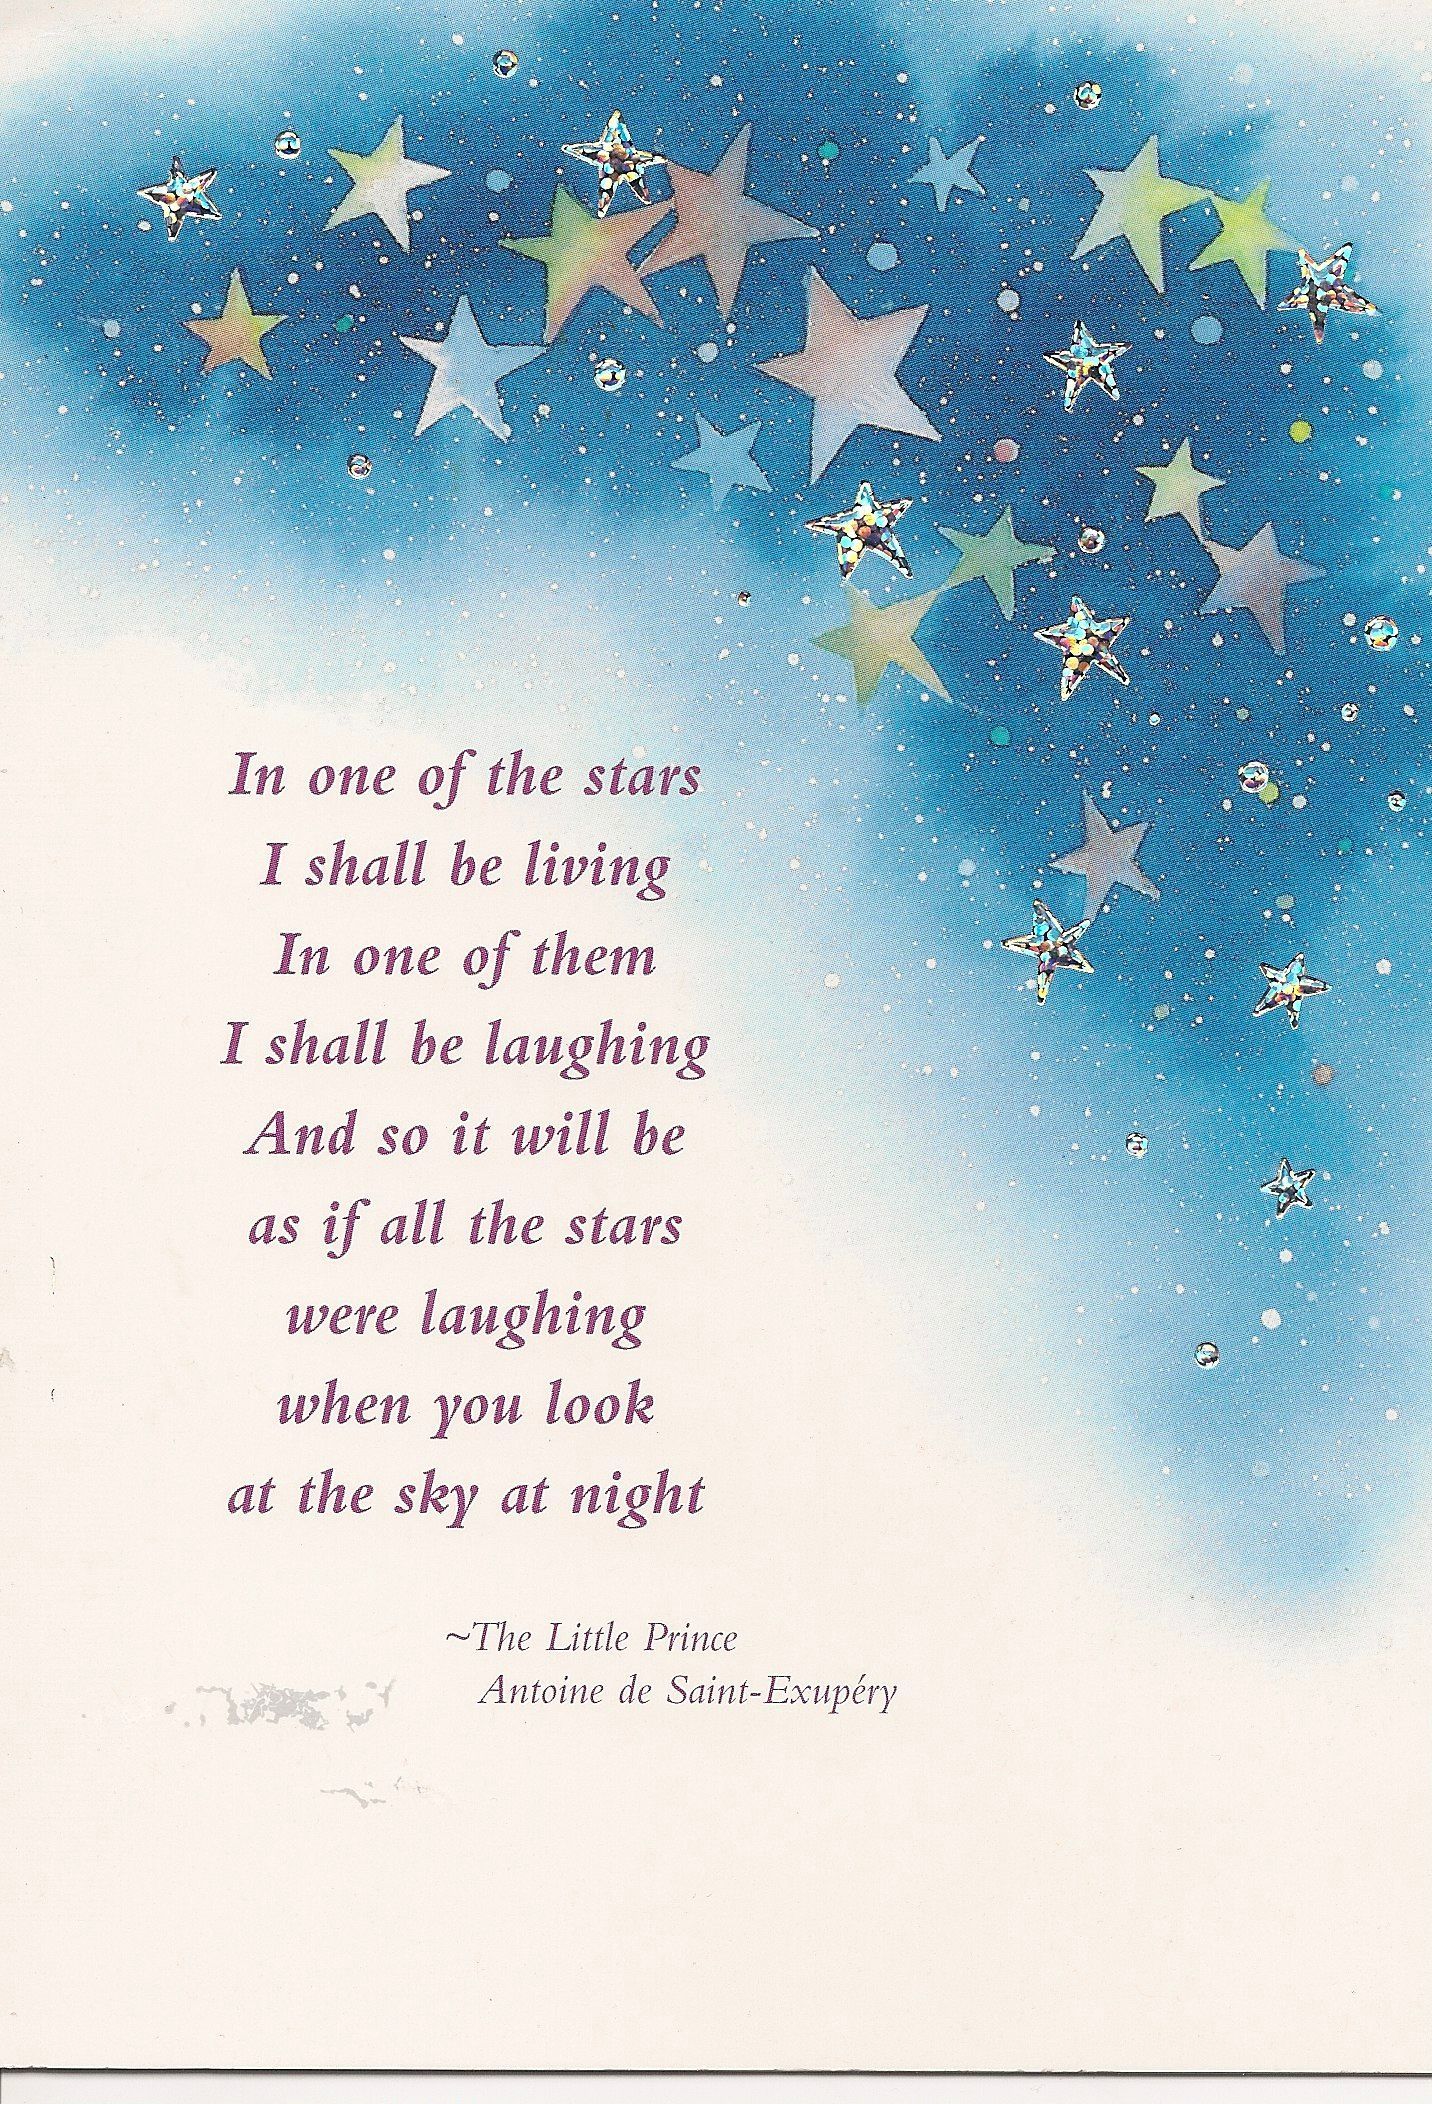 The Little Prince- Antoine de Saint-Exupery. So simple, yet with a large message for adults about our world.